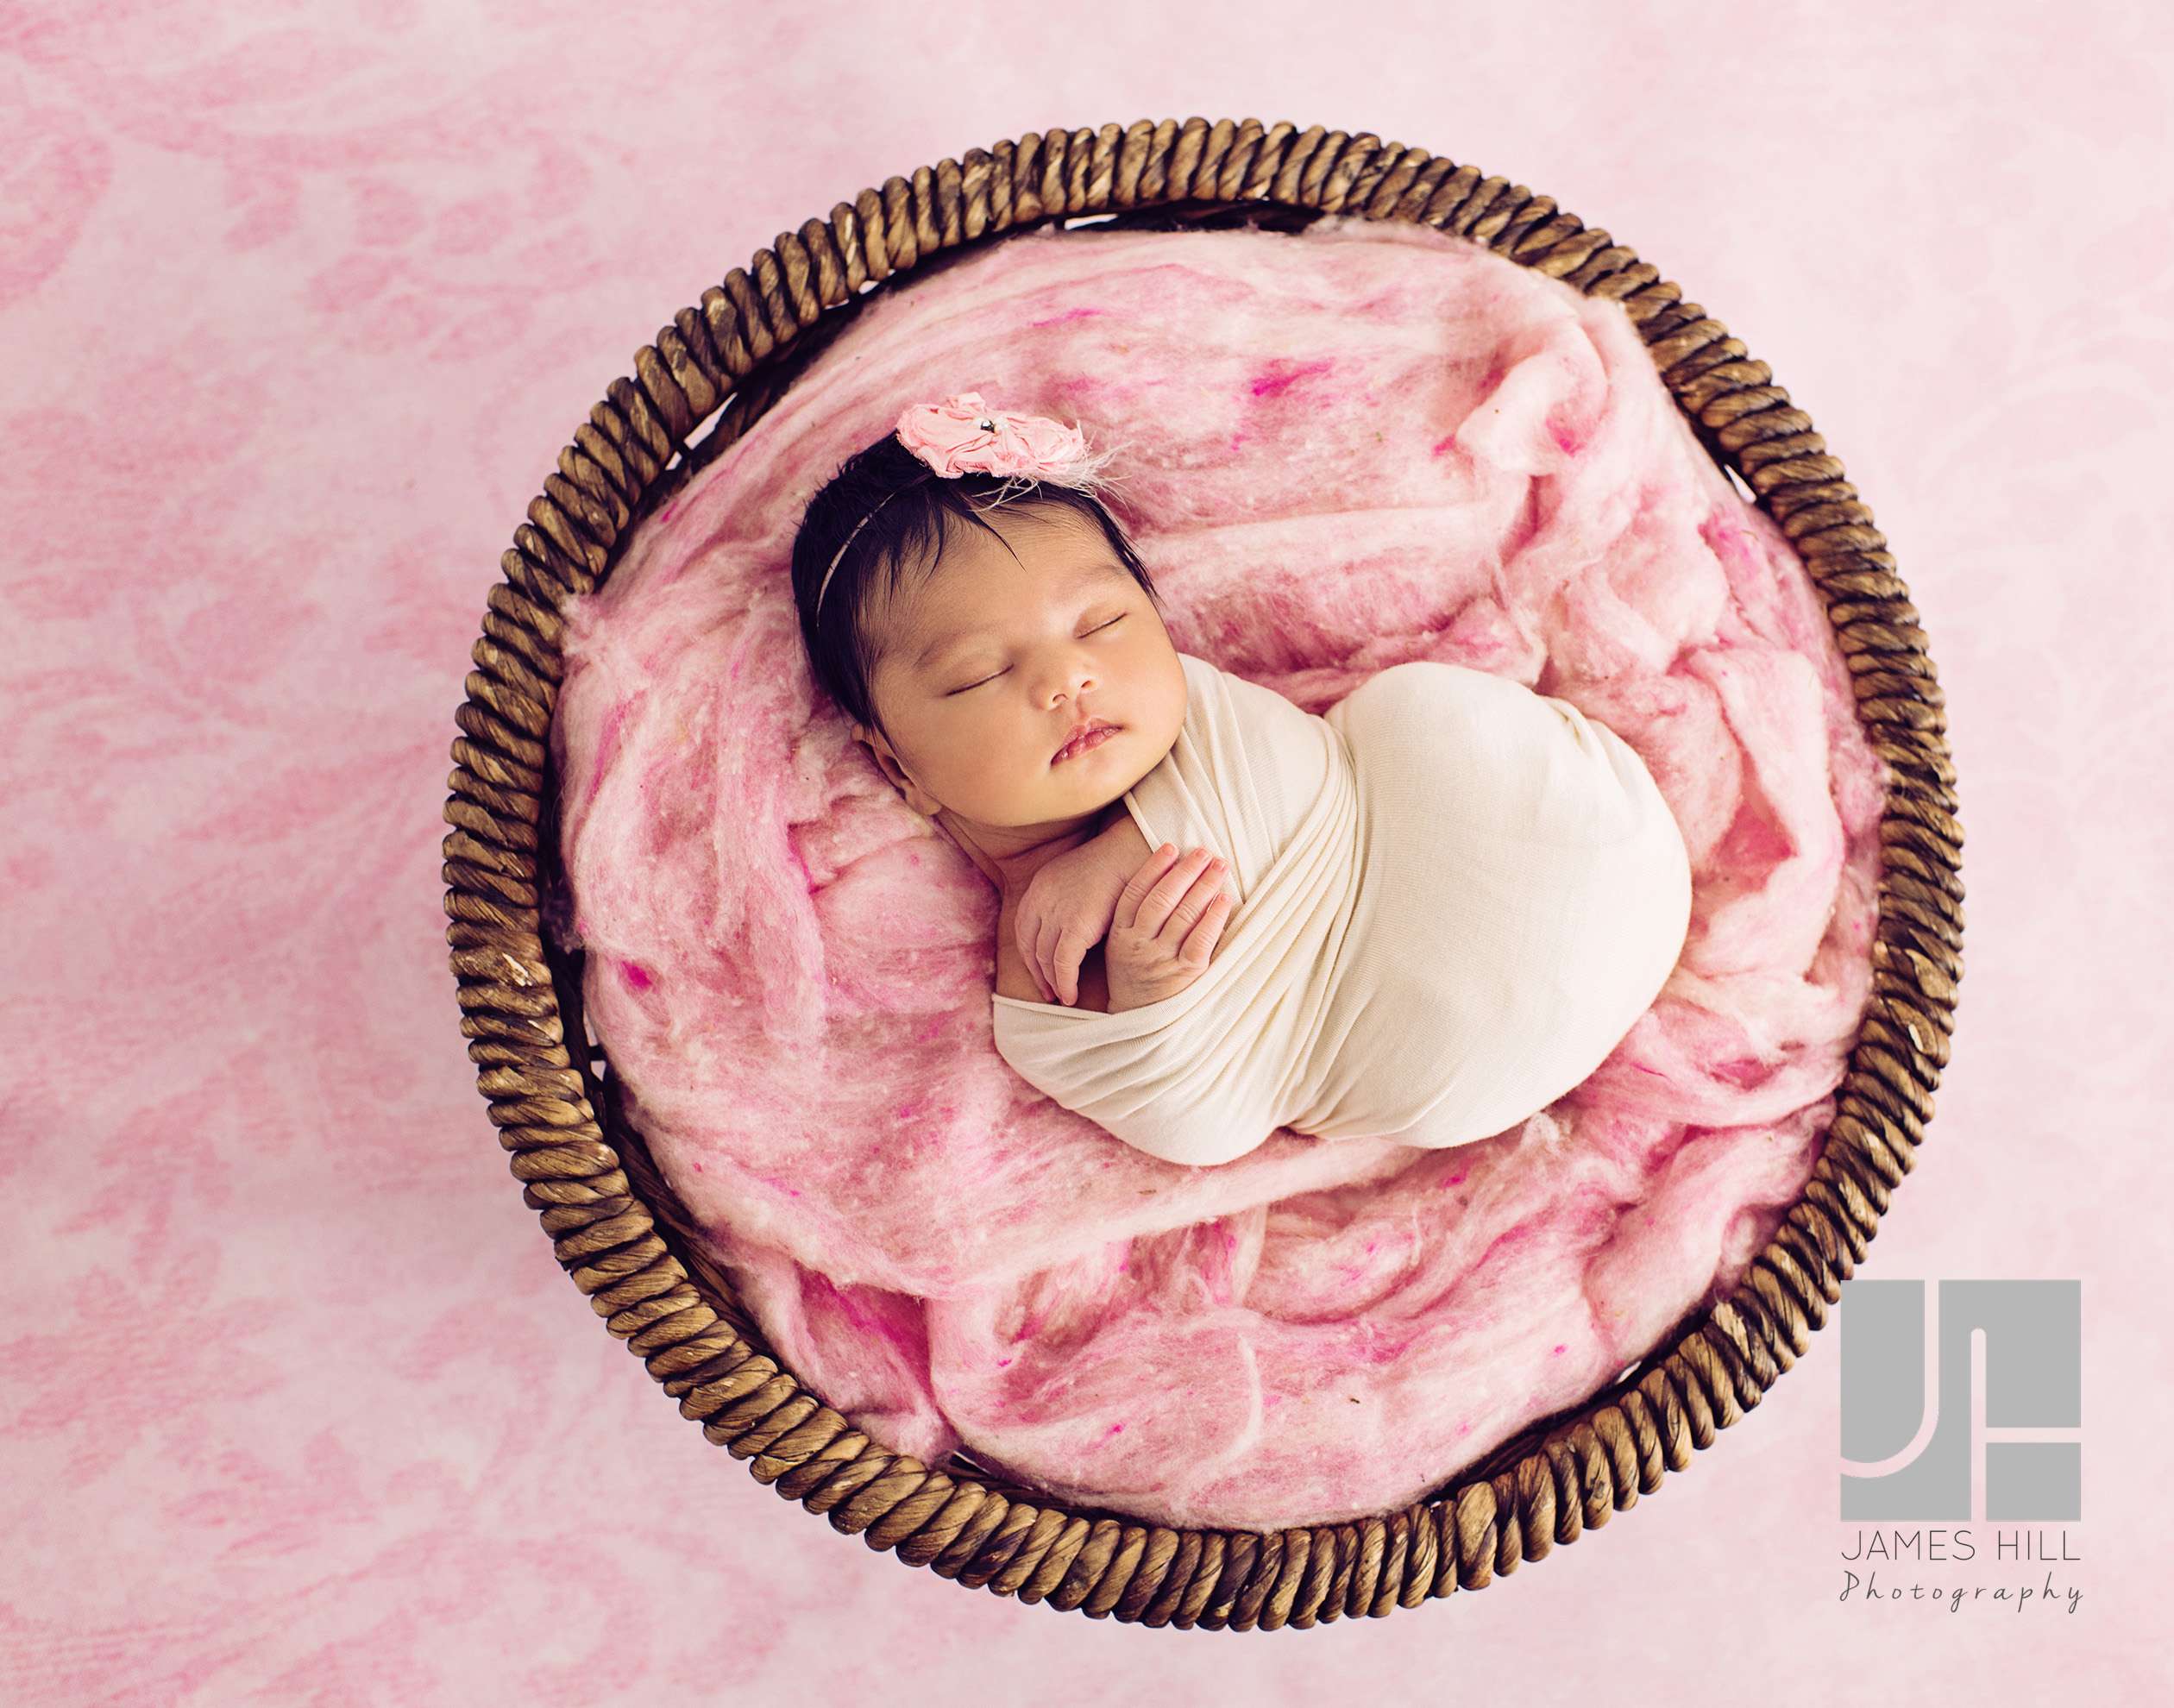 The pink in this portrait is perfect for this little princess.